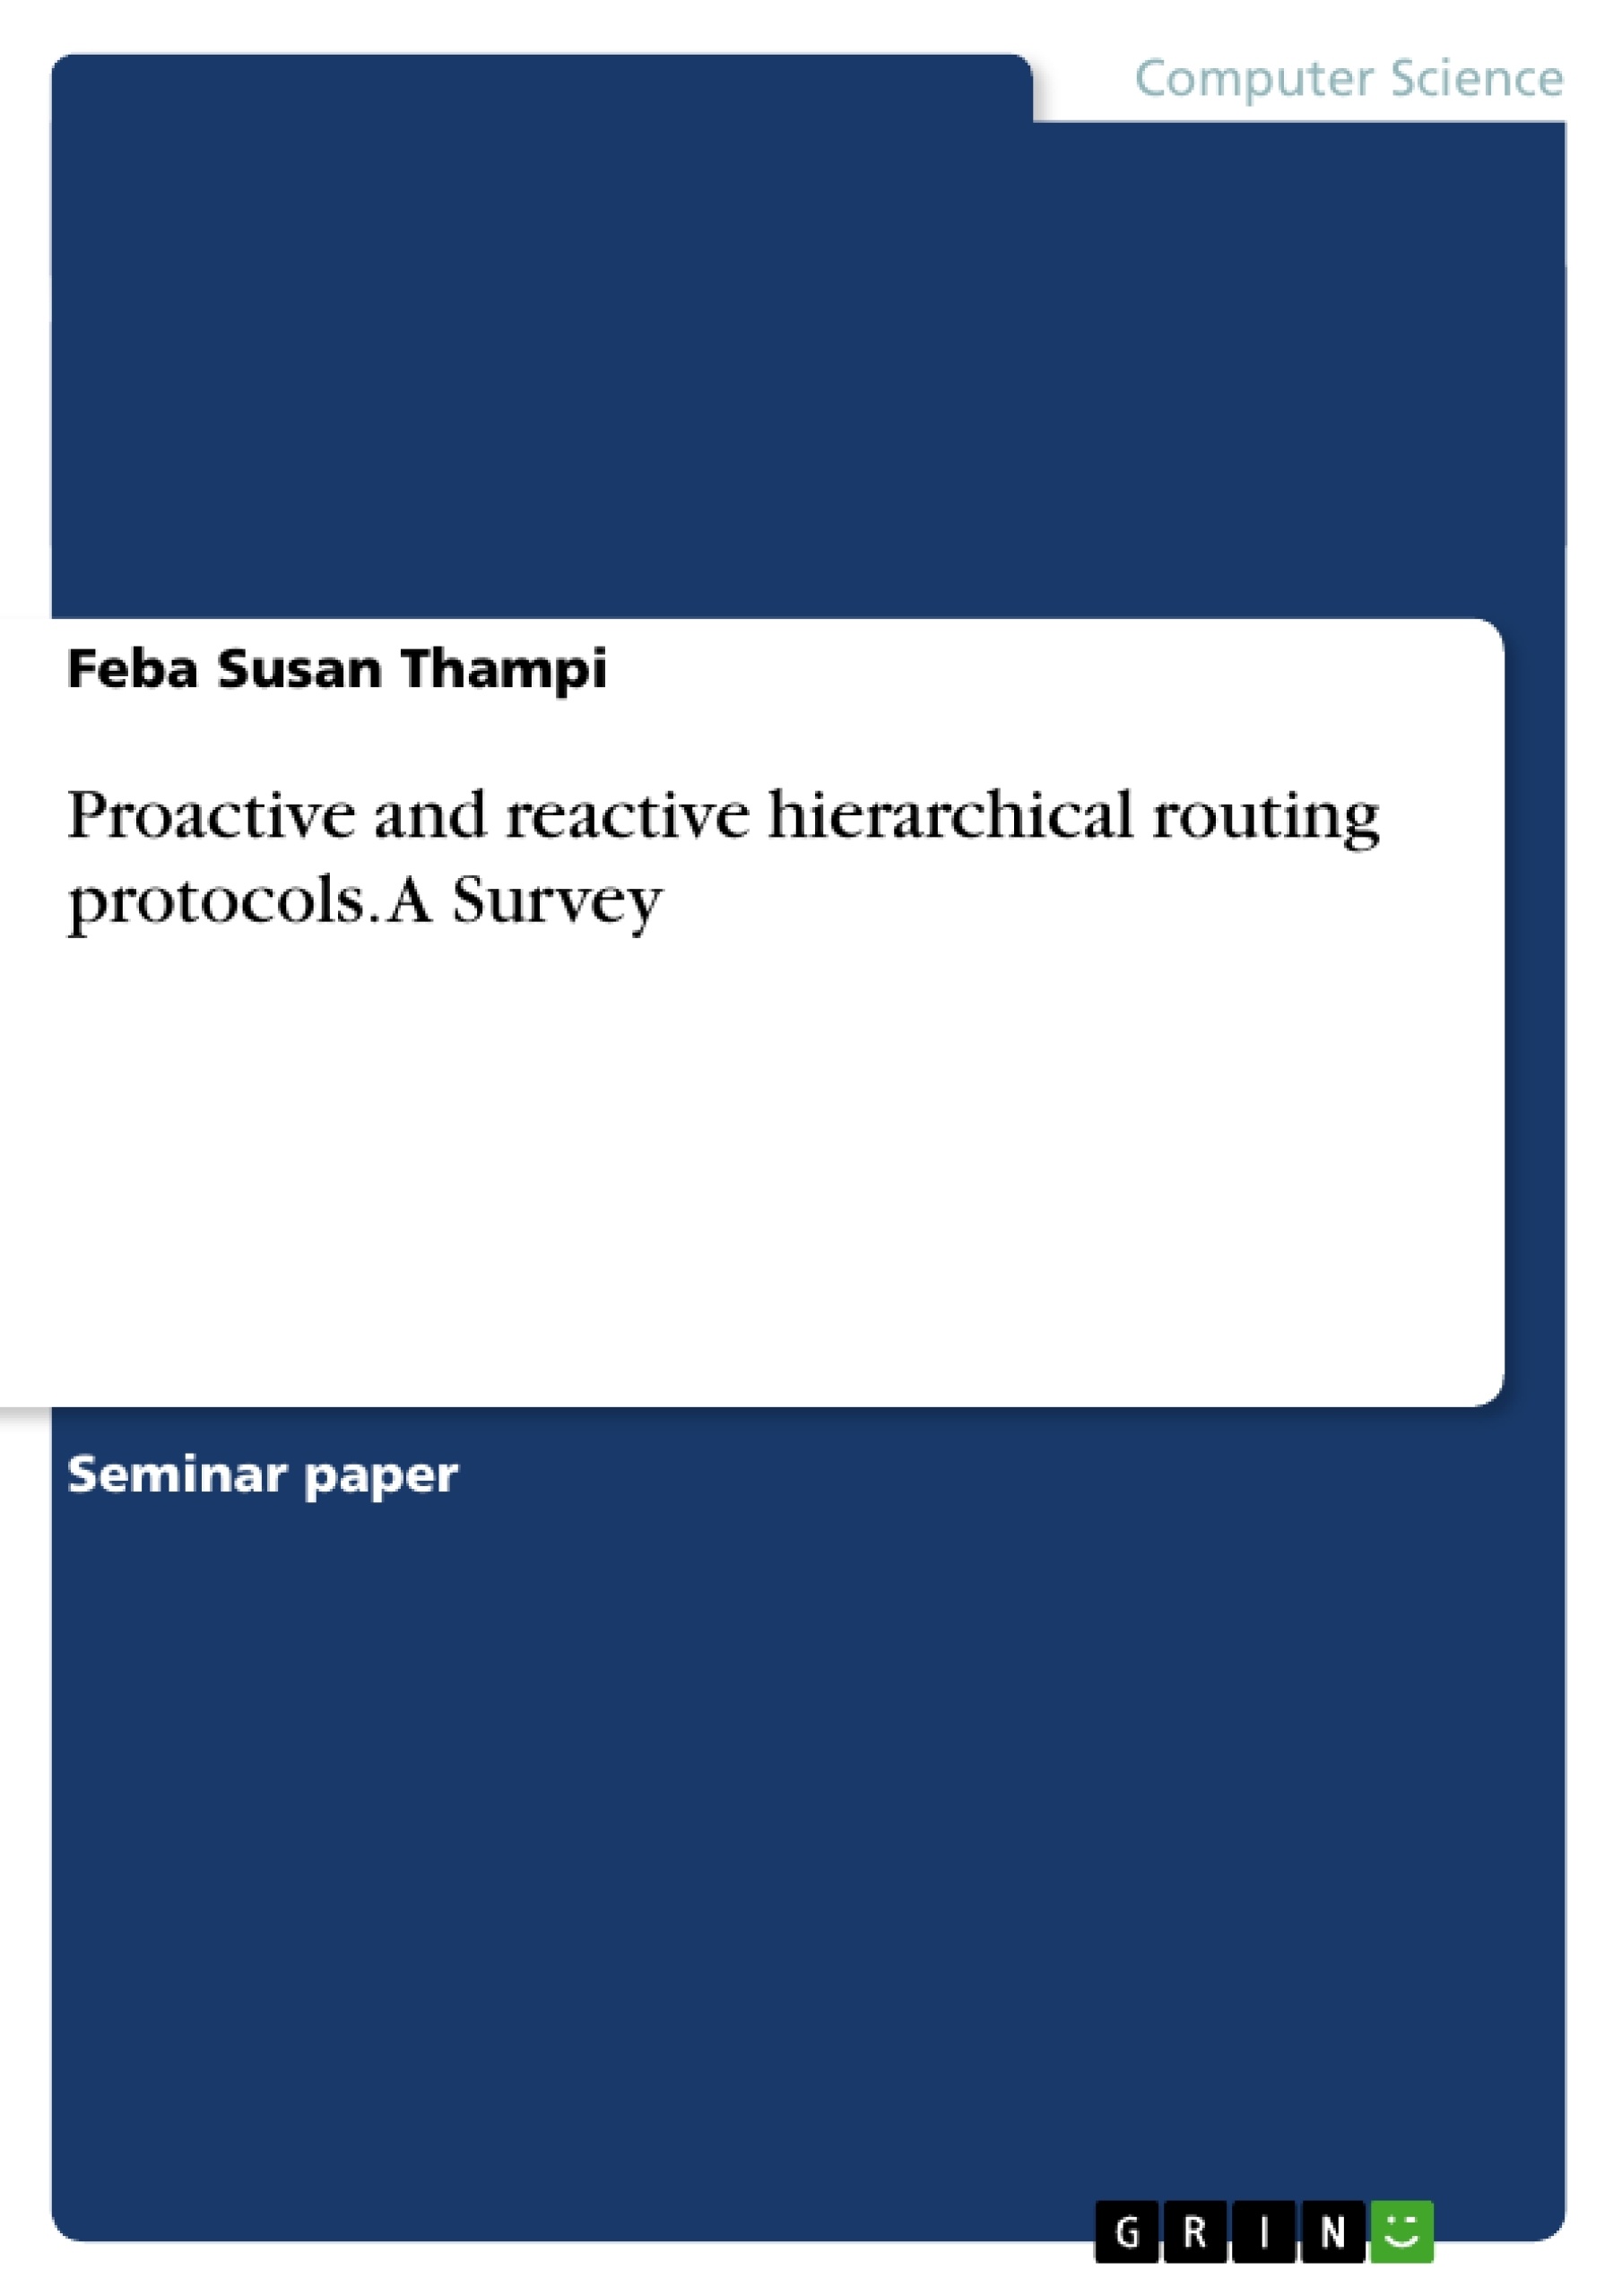 Title: Proactive and reactive hierarchical routing protocols. A Survey